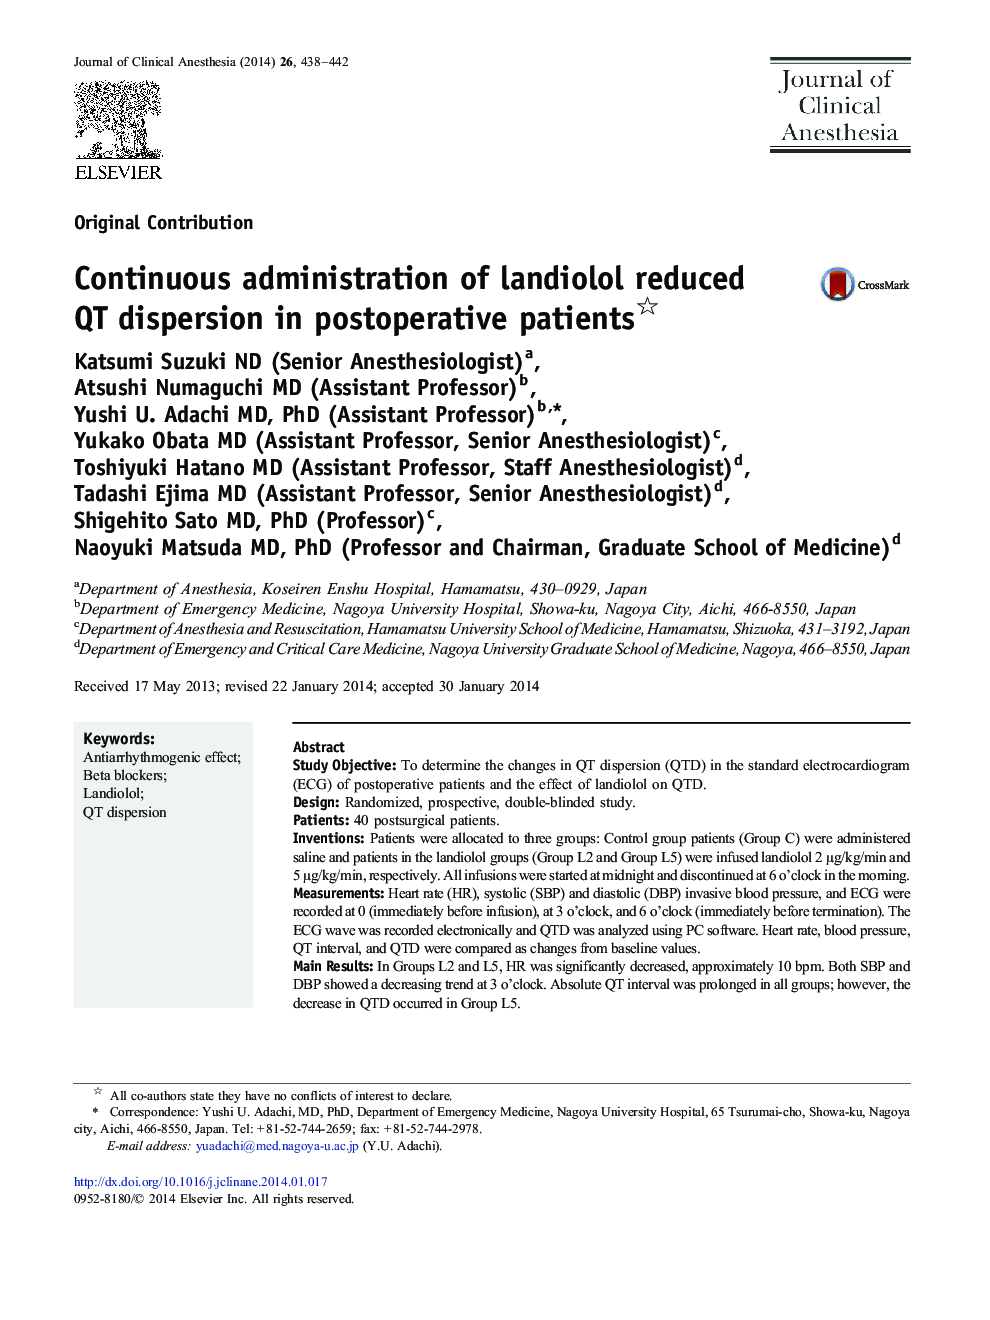 Continuous administration of landiolol reduced QT dispersion in postoperative patients 